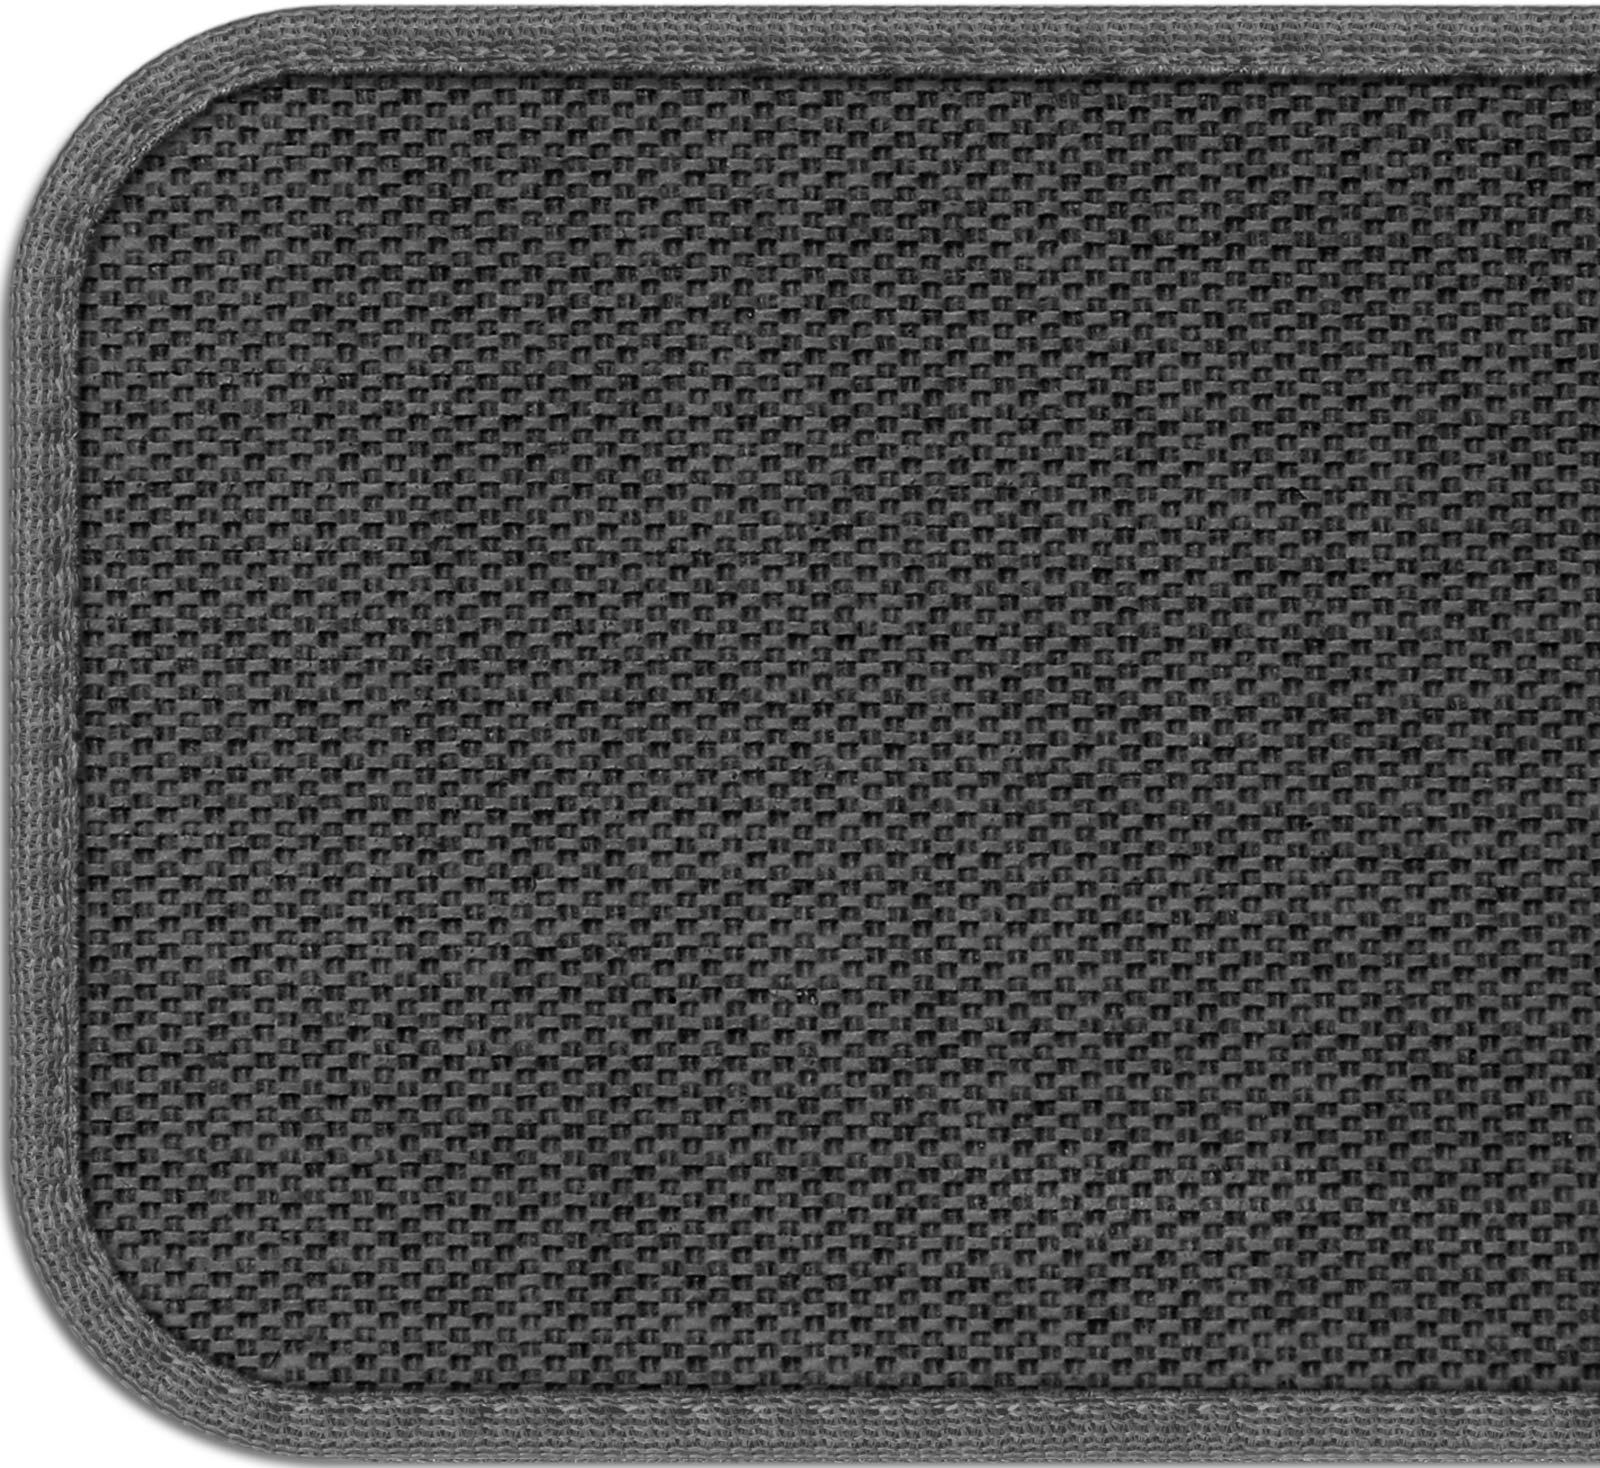 House, Home and More Set of 15 Skid-resistant Carpet Stair Treads - Gray - 8 In. X 30 In.